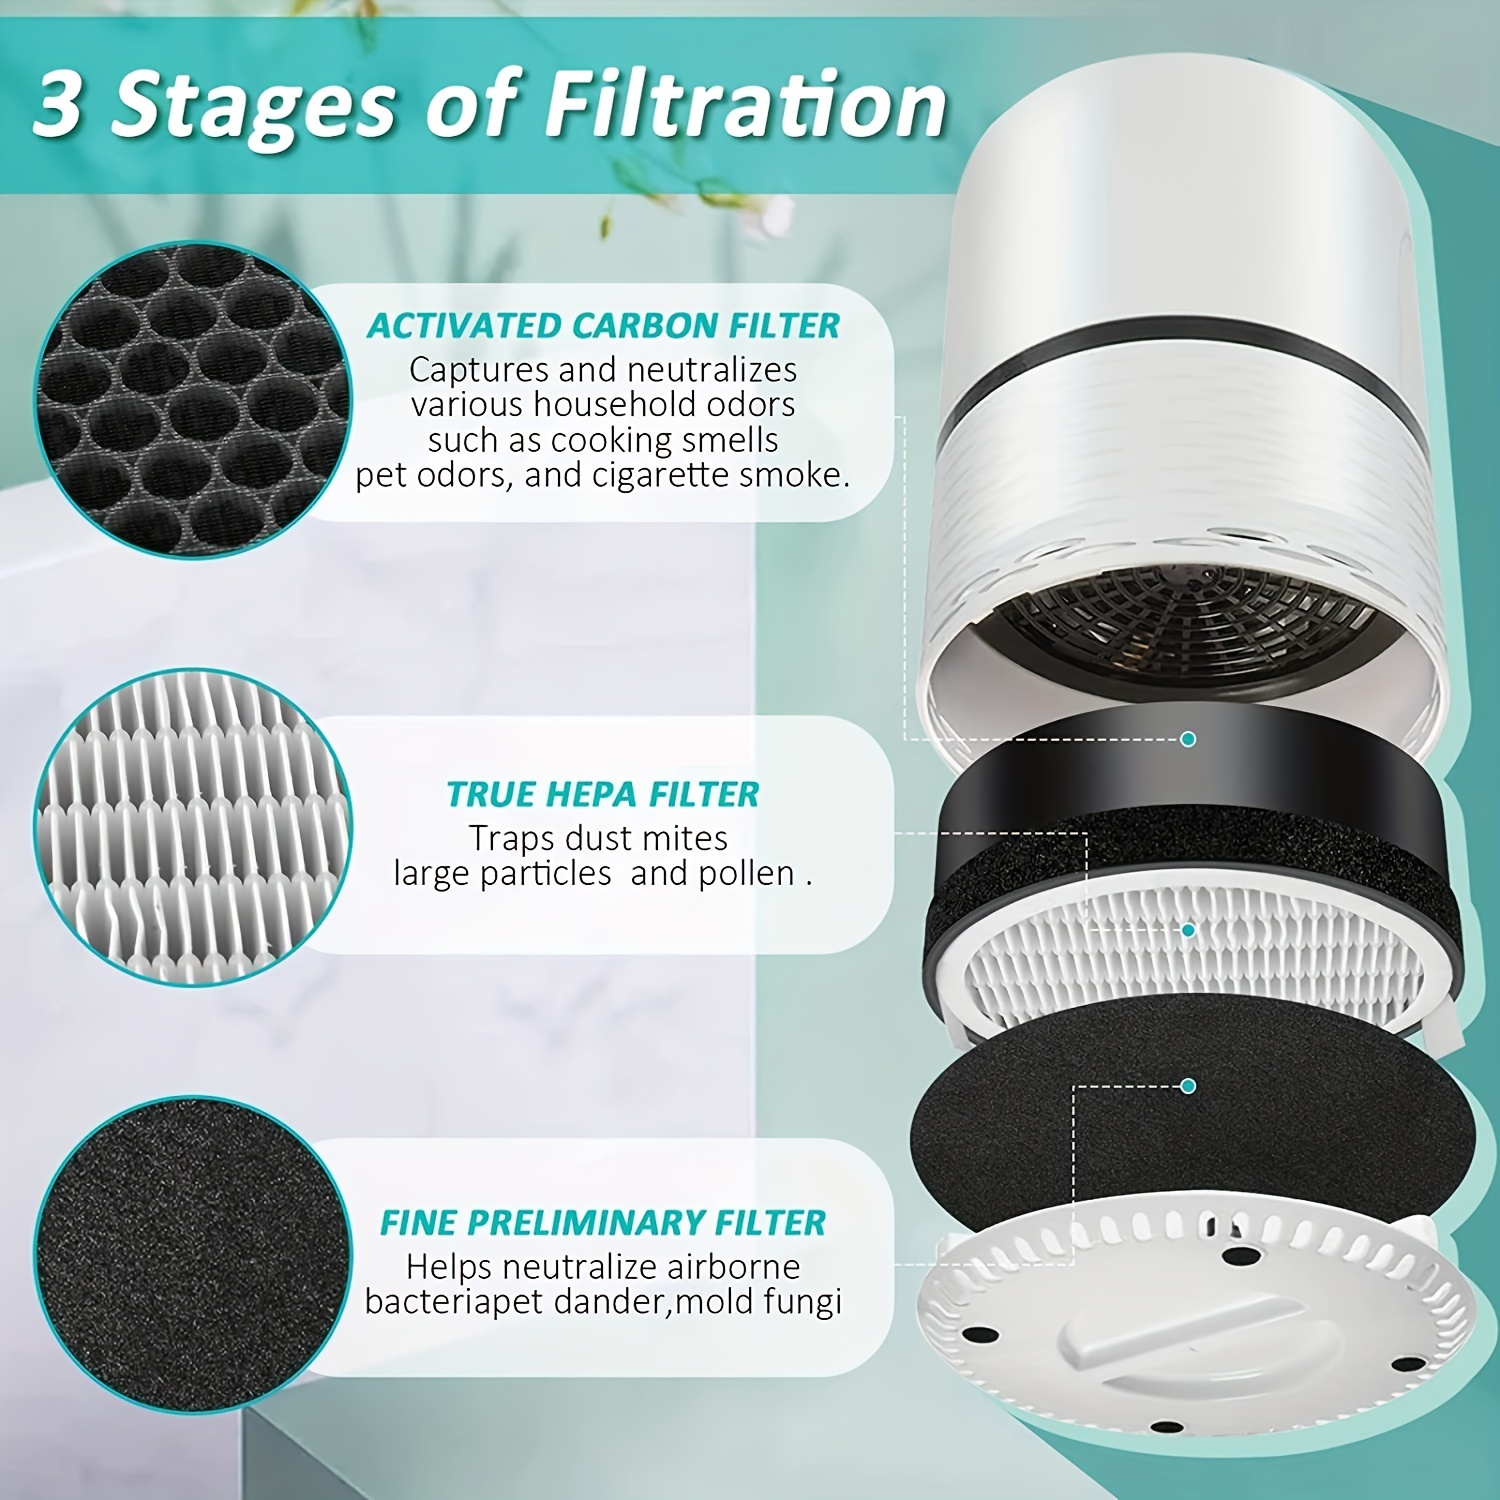 LEVOIT LV-H132 Air Purifier Replacement Filter, 3-in-1 Nylon Pre-Filter,  HEPA Filter, High-Efficiency Activated Carbon Filter, LV-H132-RF, 4 Pack